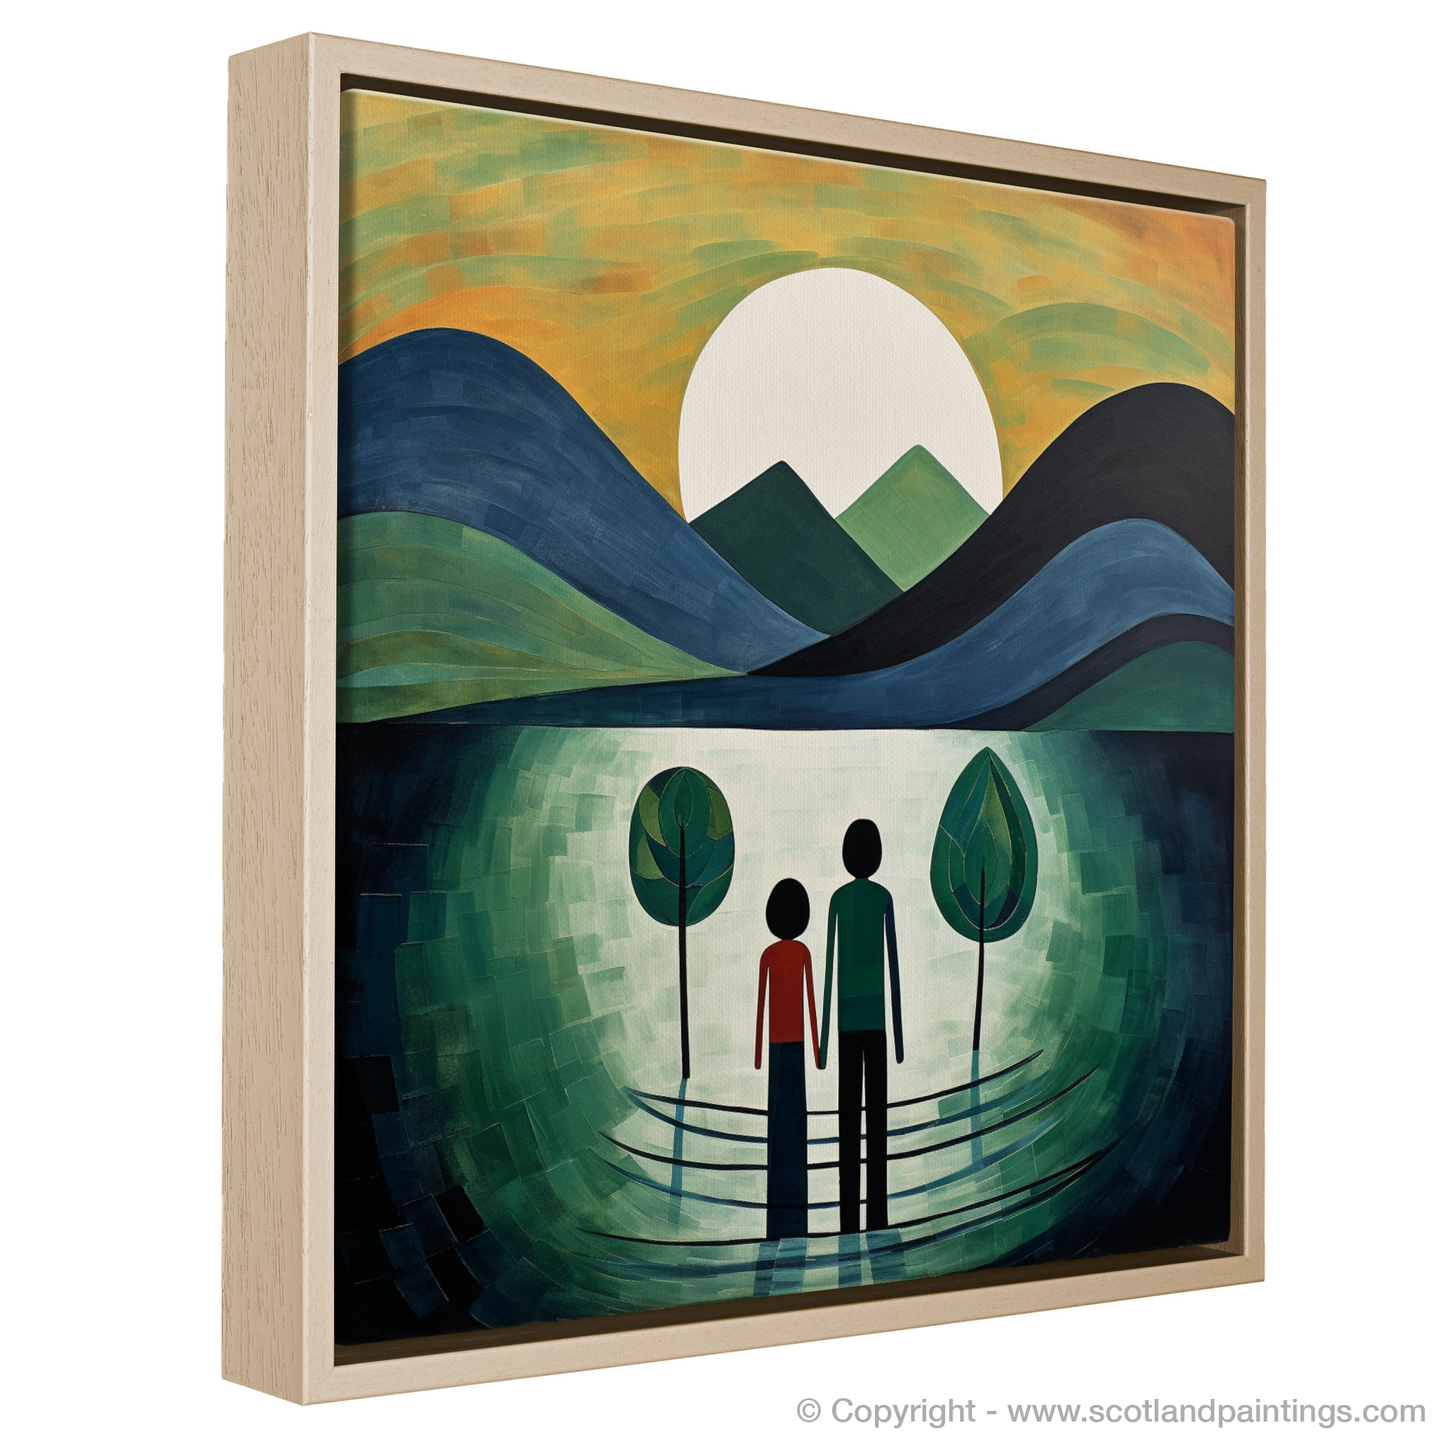 Painting and Art Print of A couple holding hands looking out on Loch Lomond entitled "Embrace of Serenity: An Abstract Ode to Loch Lomond Companionship".